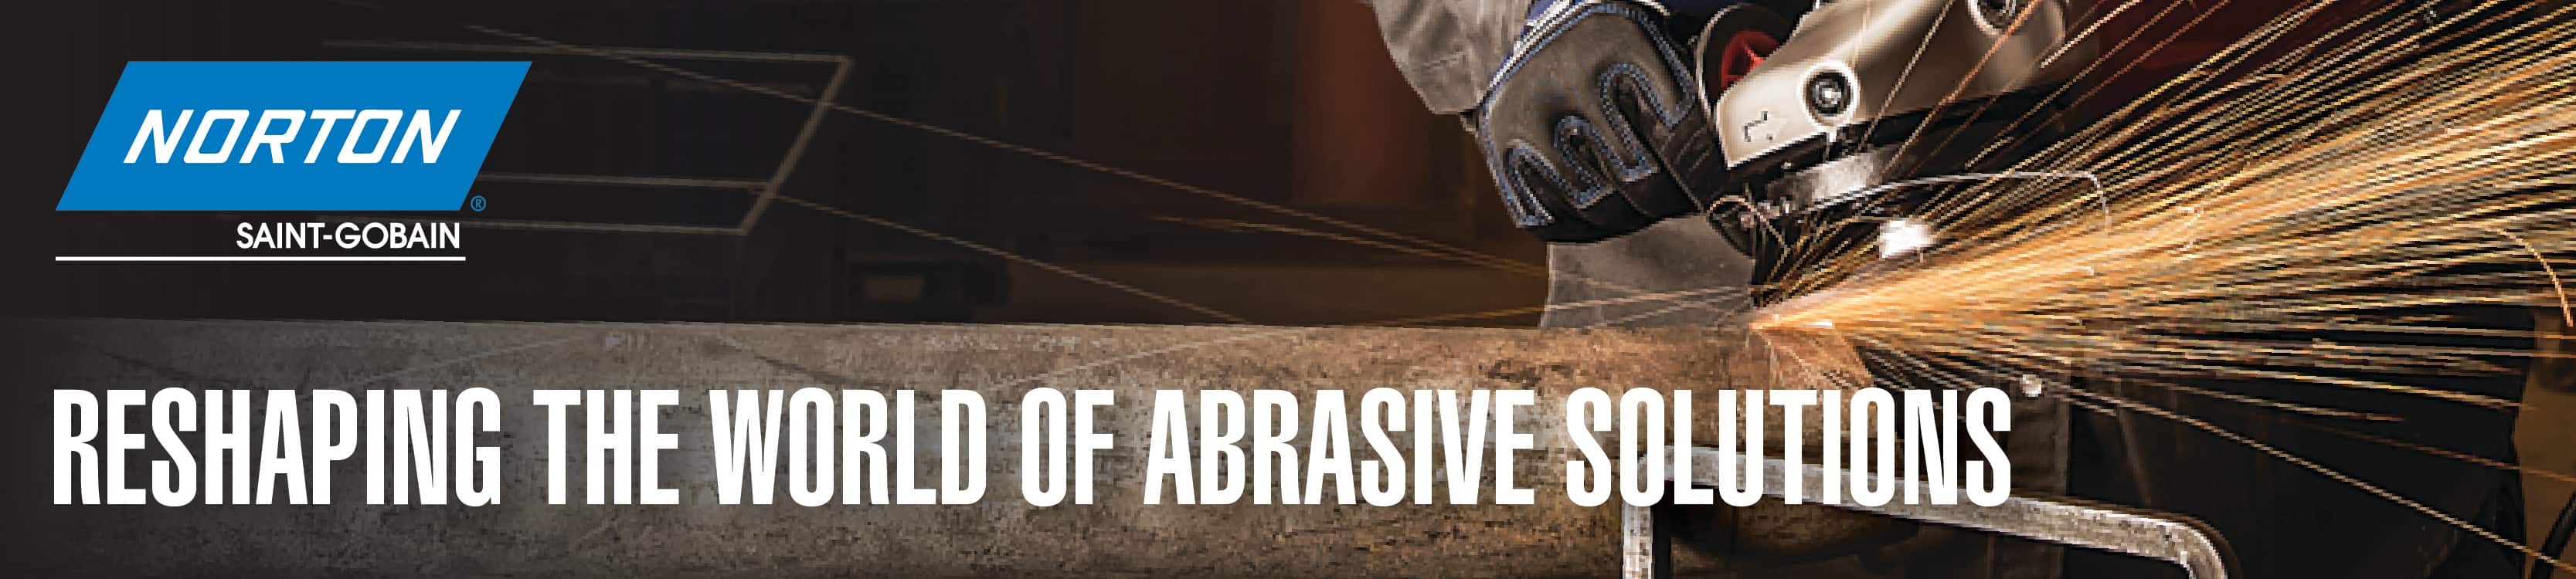 Norton Reshaping The World Of Abrasive Solutions